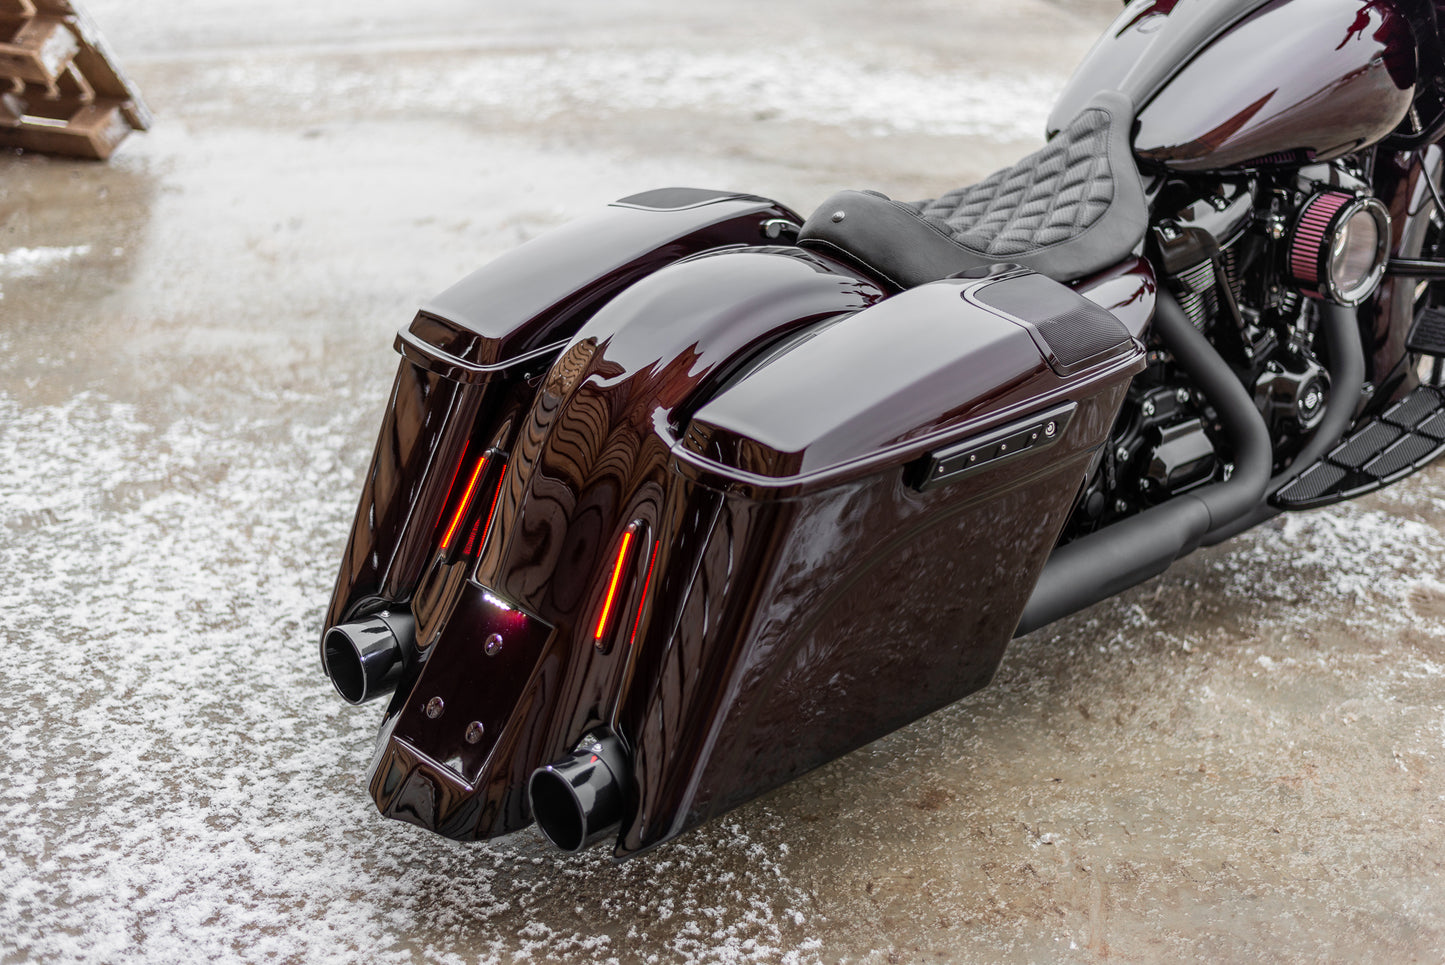 Harley Davidson motorcycle with Killer Custom touring tail lights from the side outside with visible snow on the ground